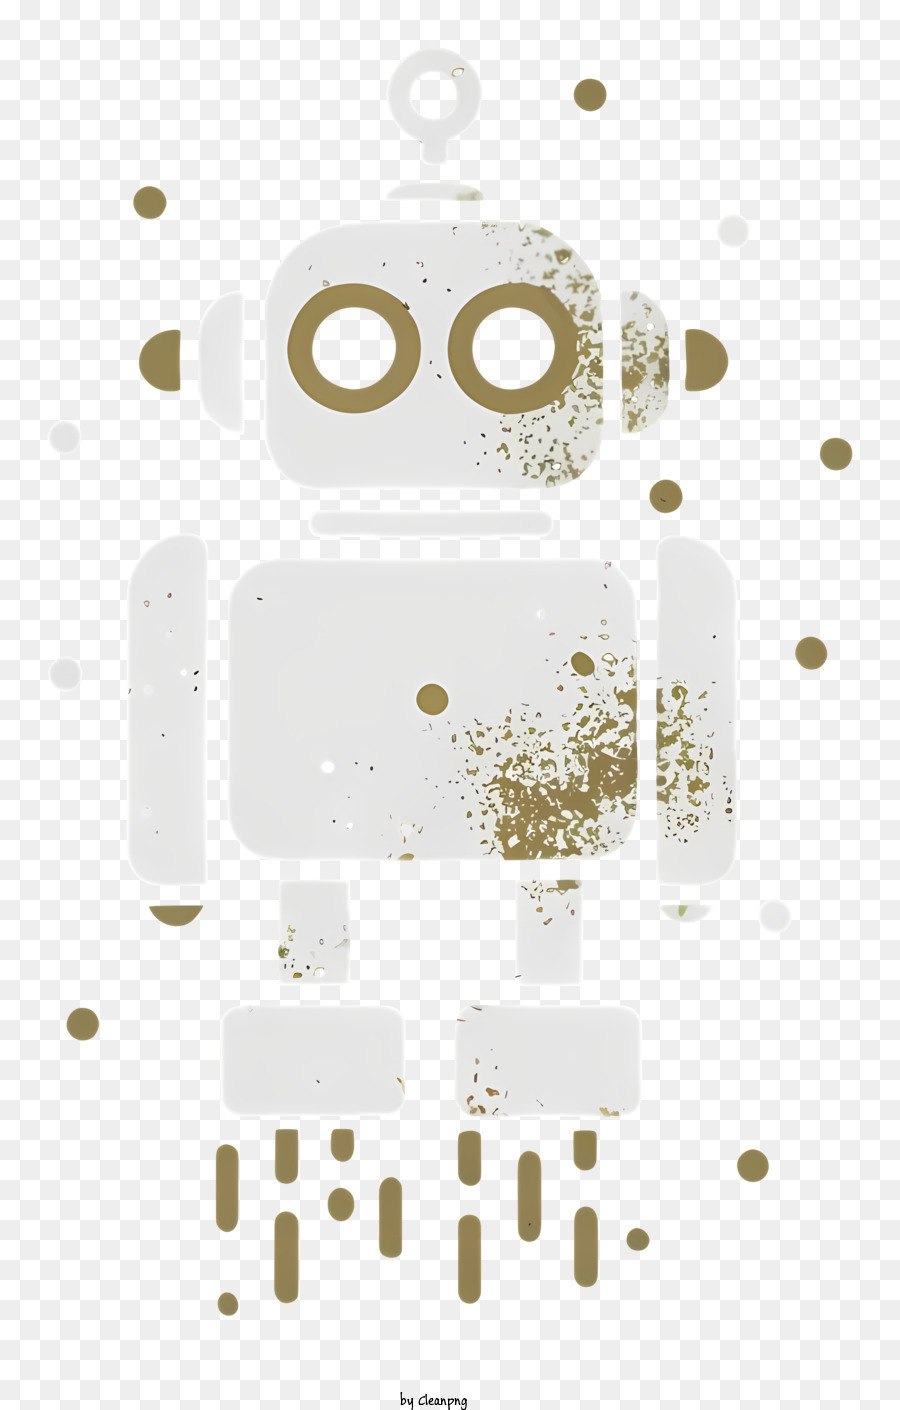 cartoon robot curious expression two legs arms outstretched